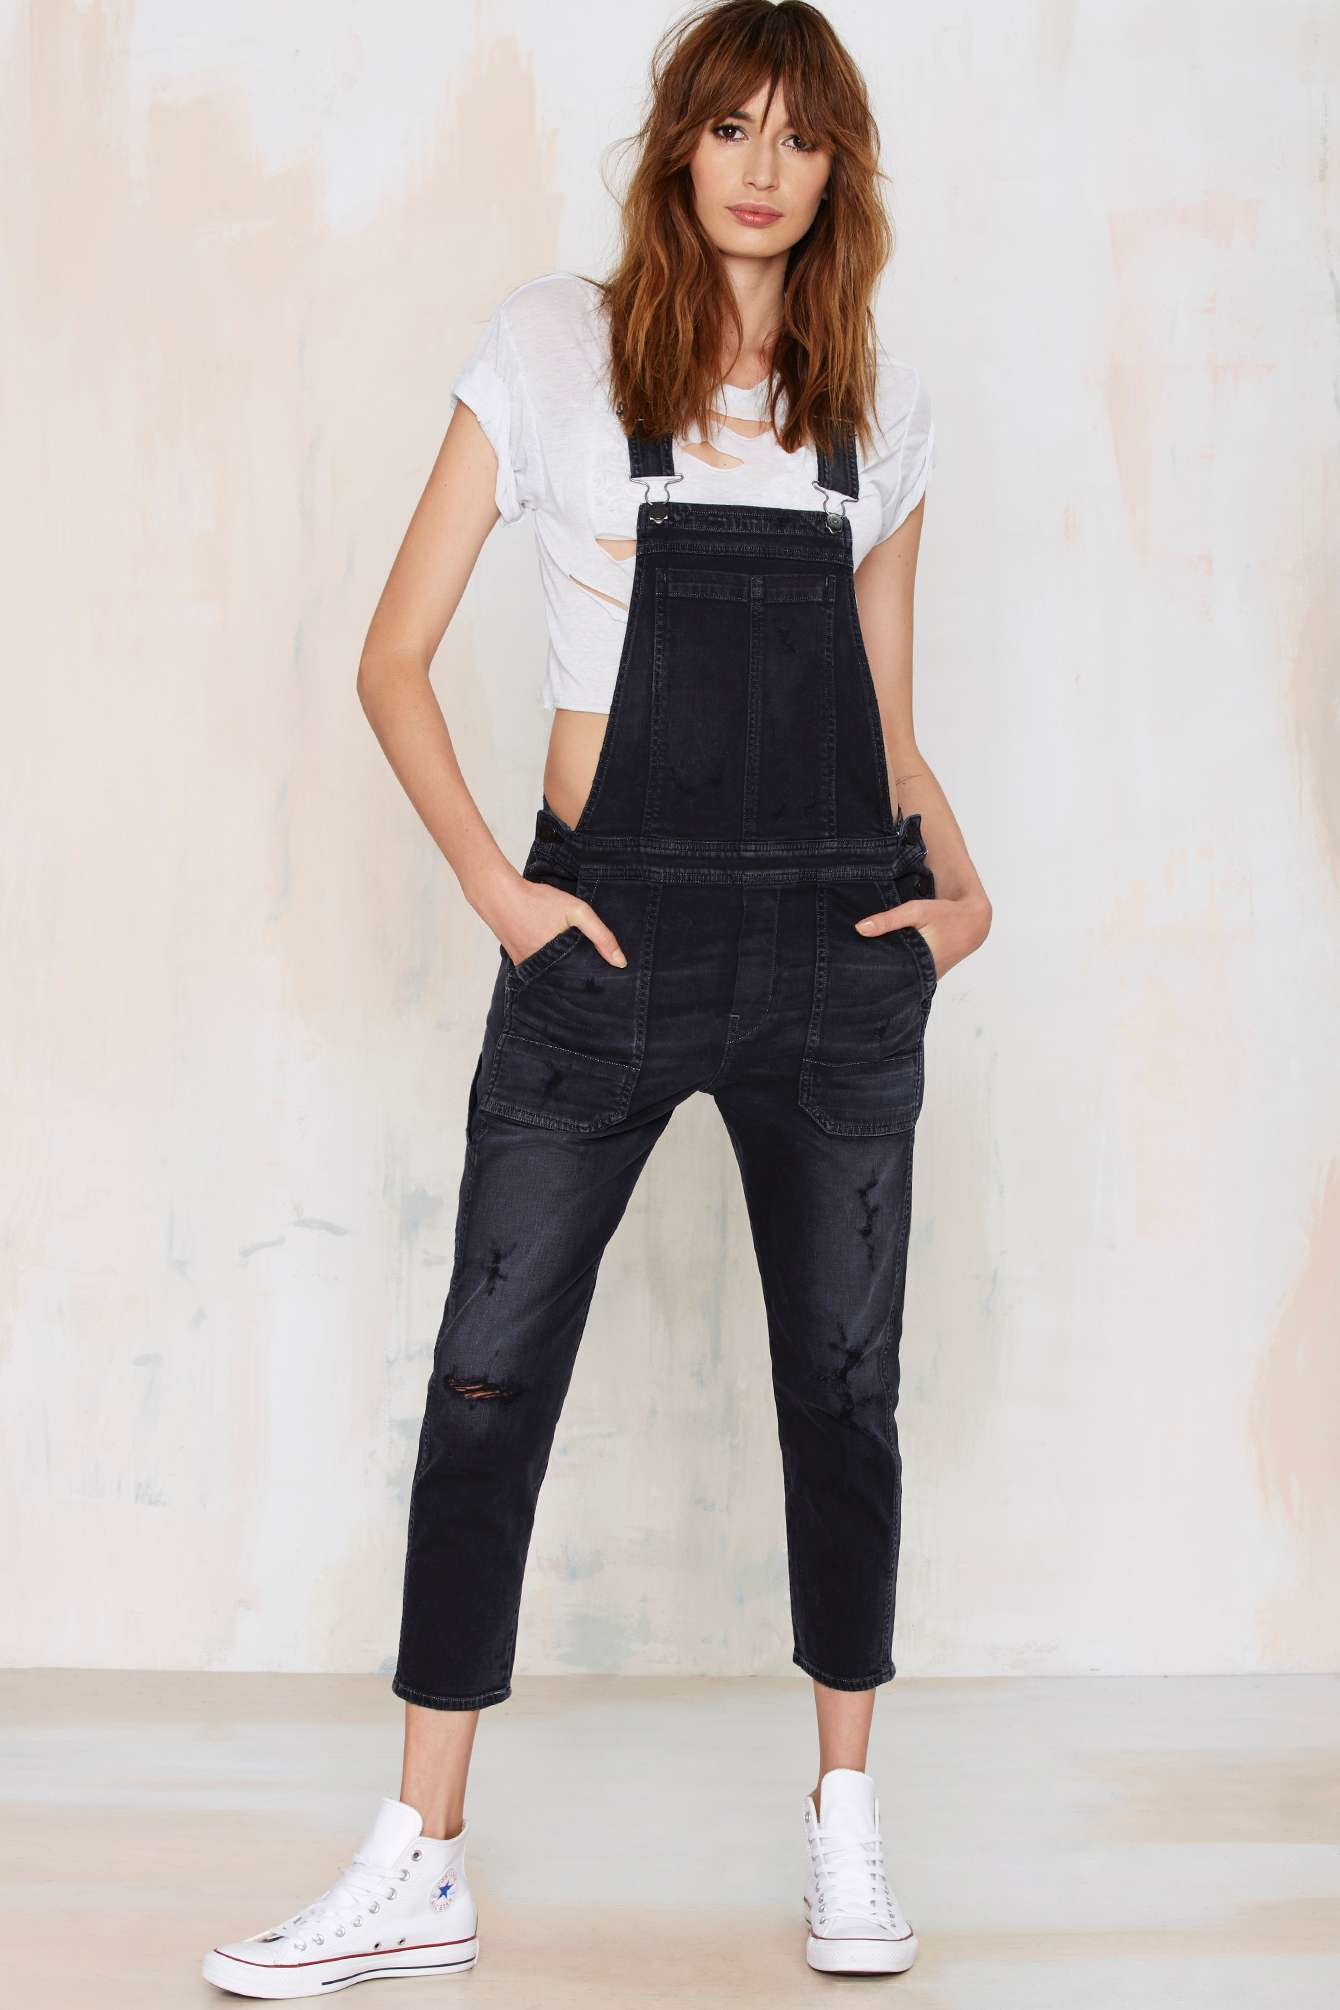 Citizens of humanity Of Humanity Audrey Denim Overalls in Blue | Lyst